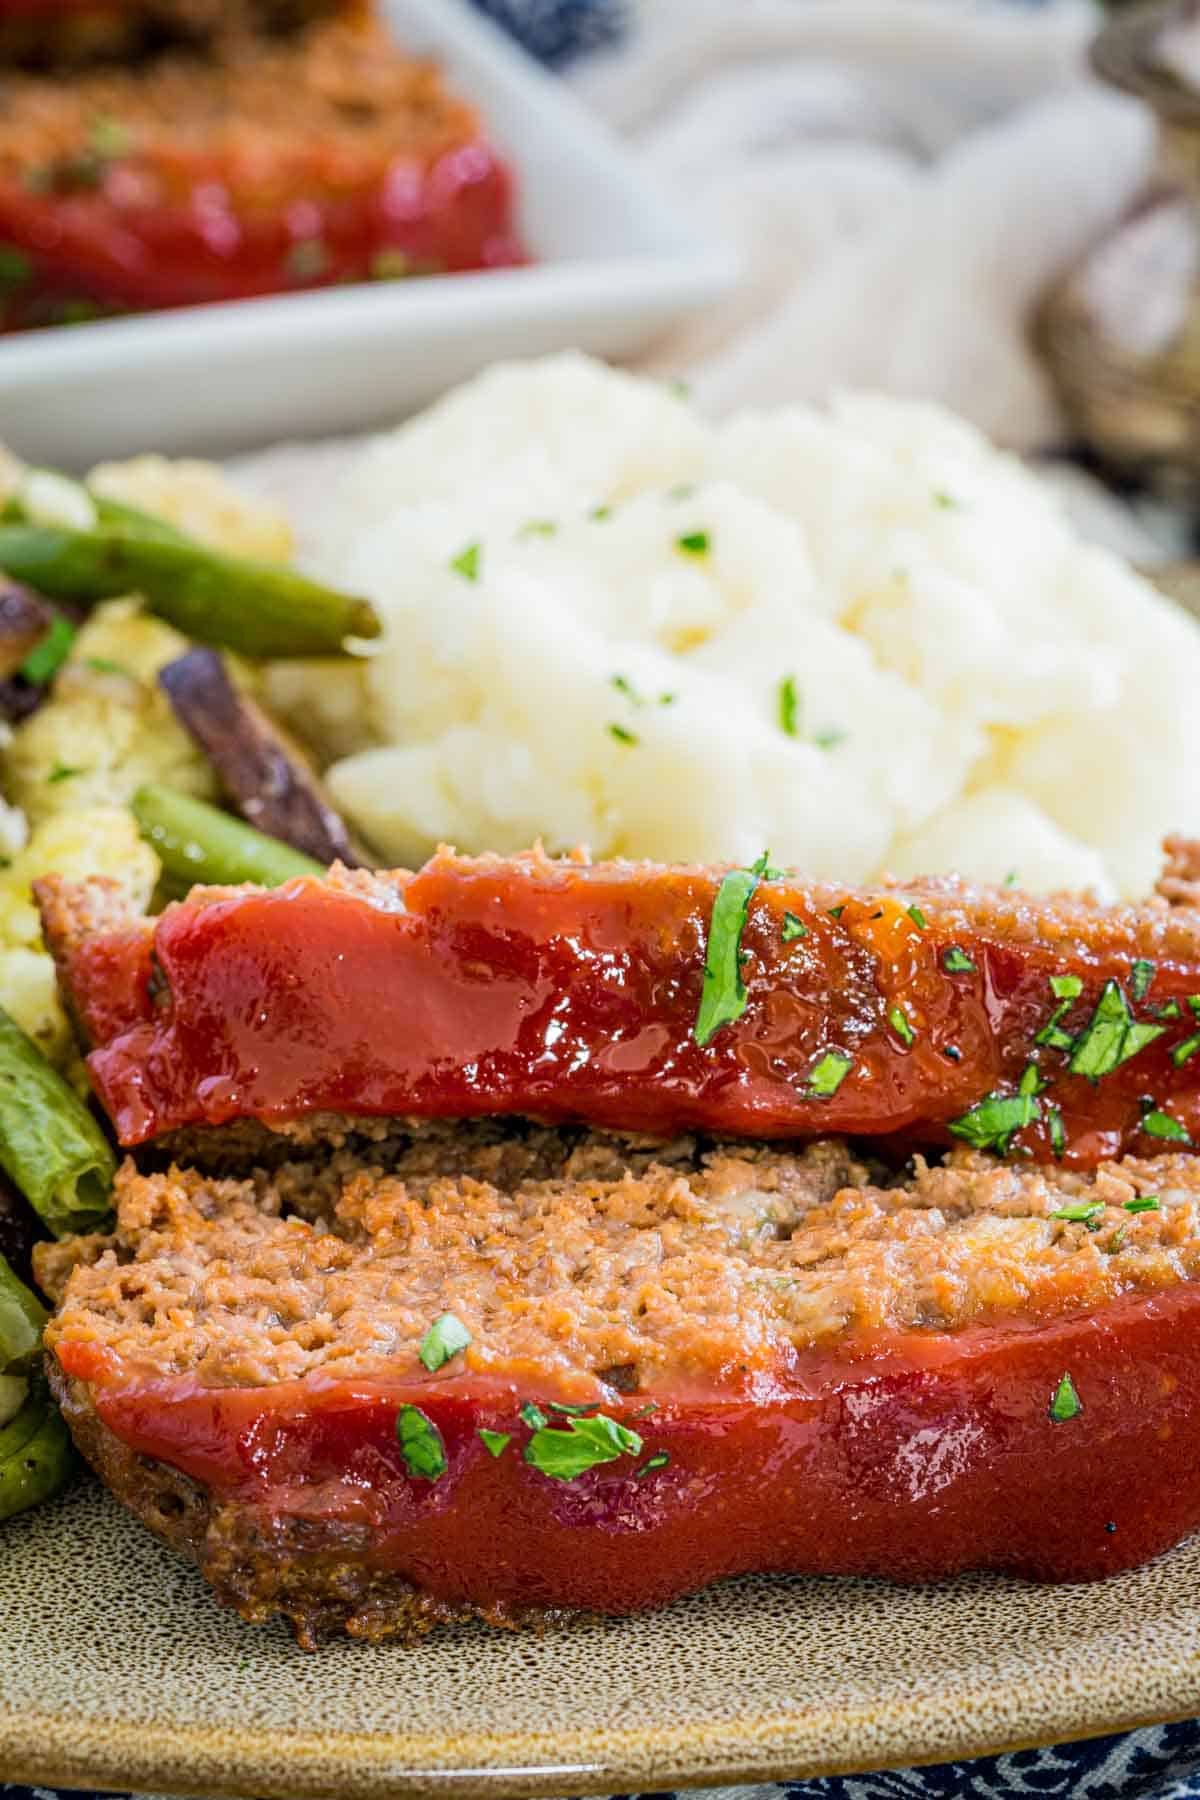 Slices of gluten-free meatloaf on a grey plate next to mashed potatoes and roasted vegetables.